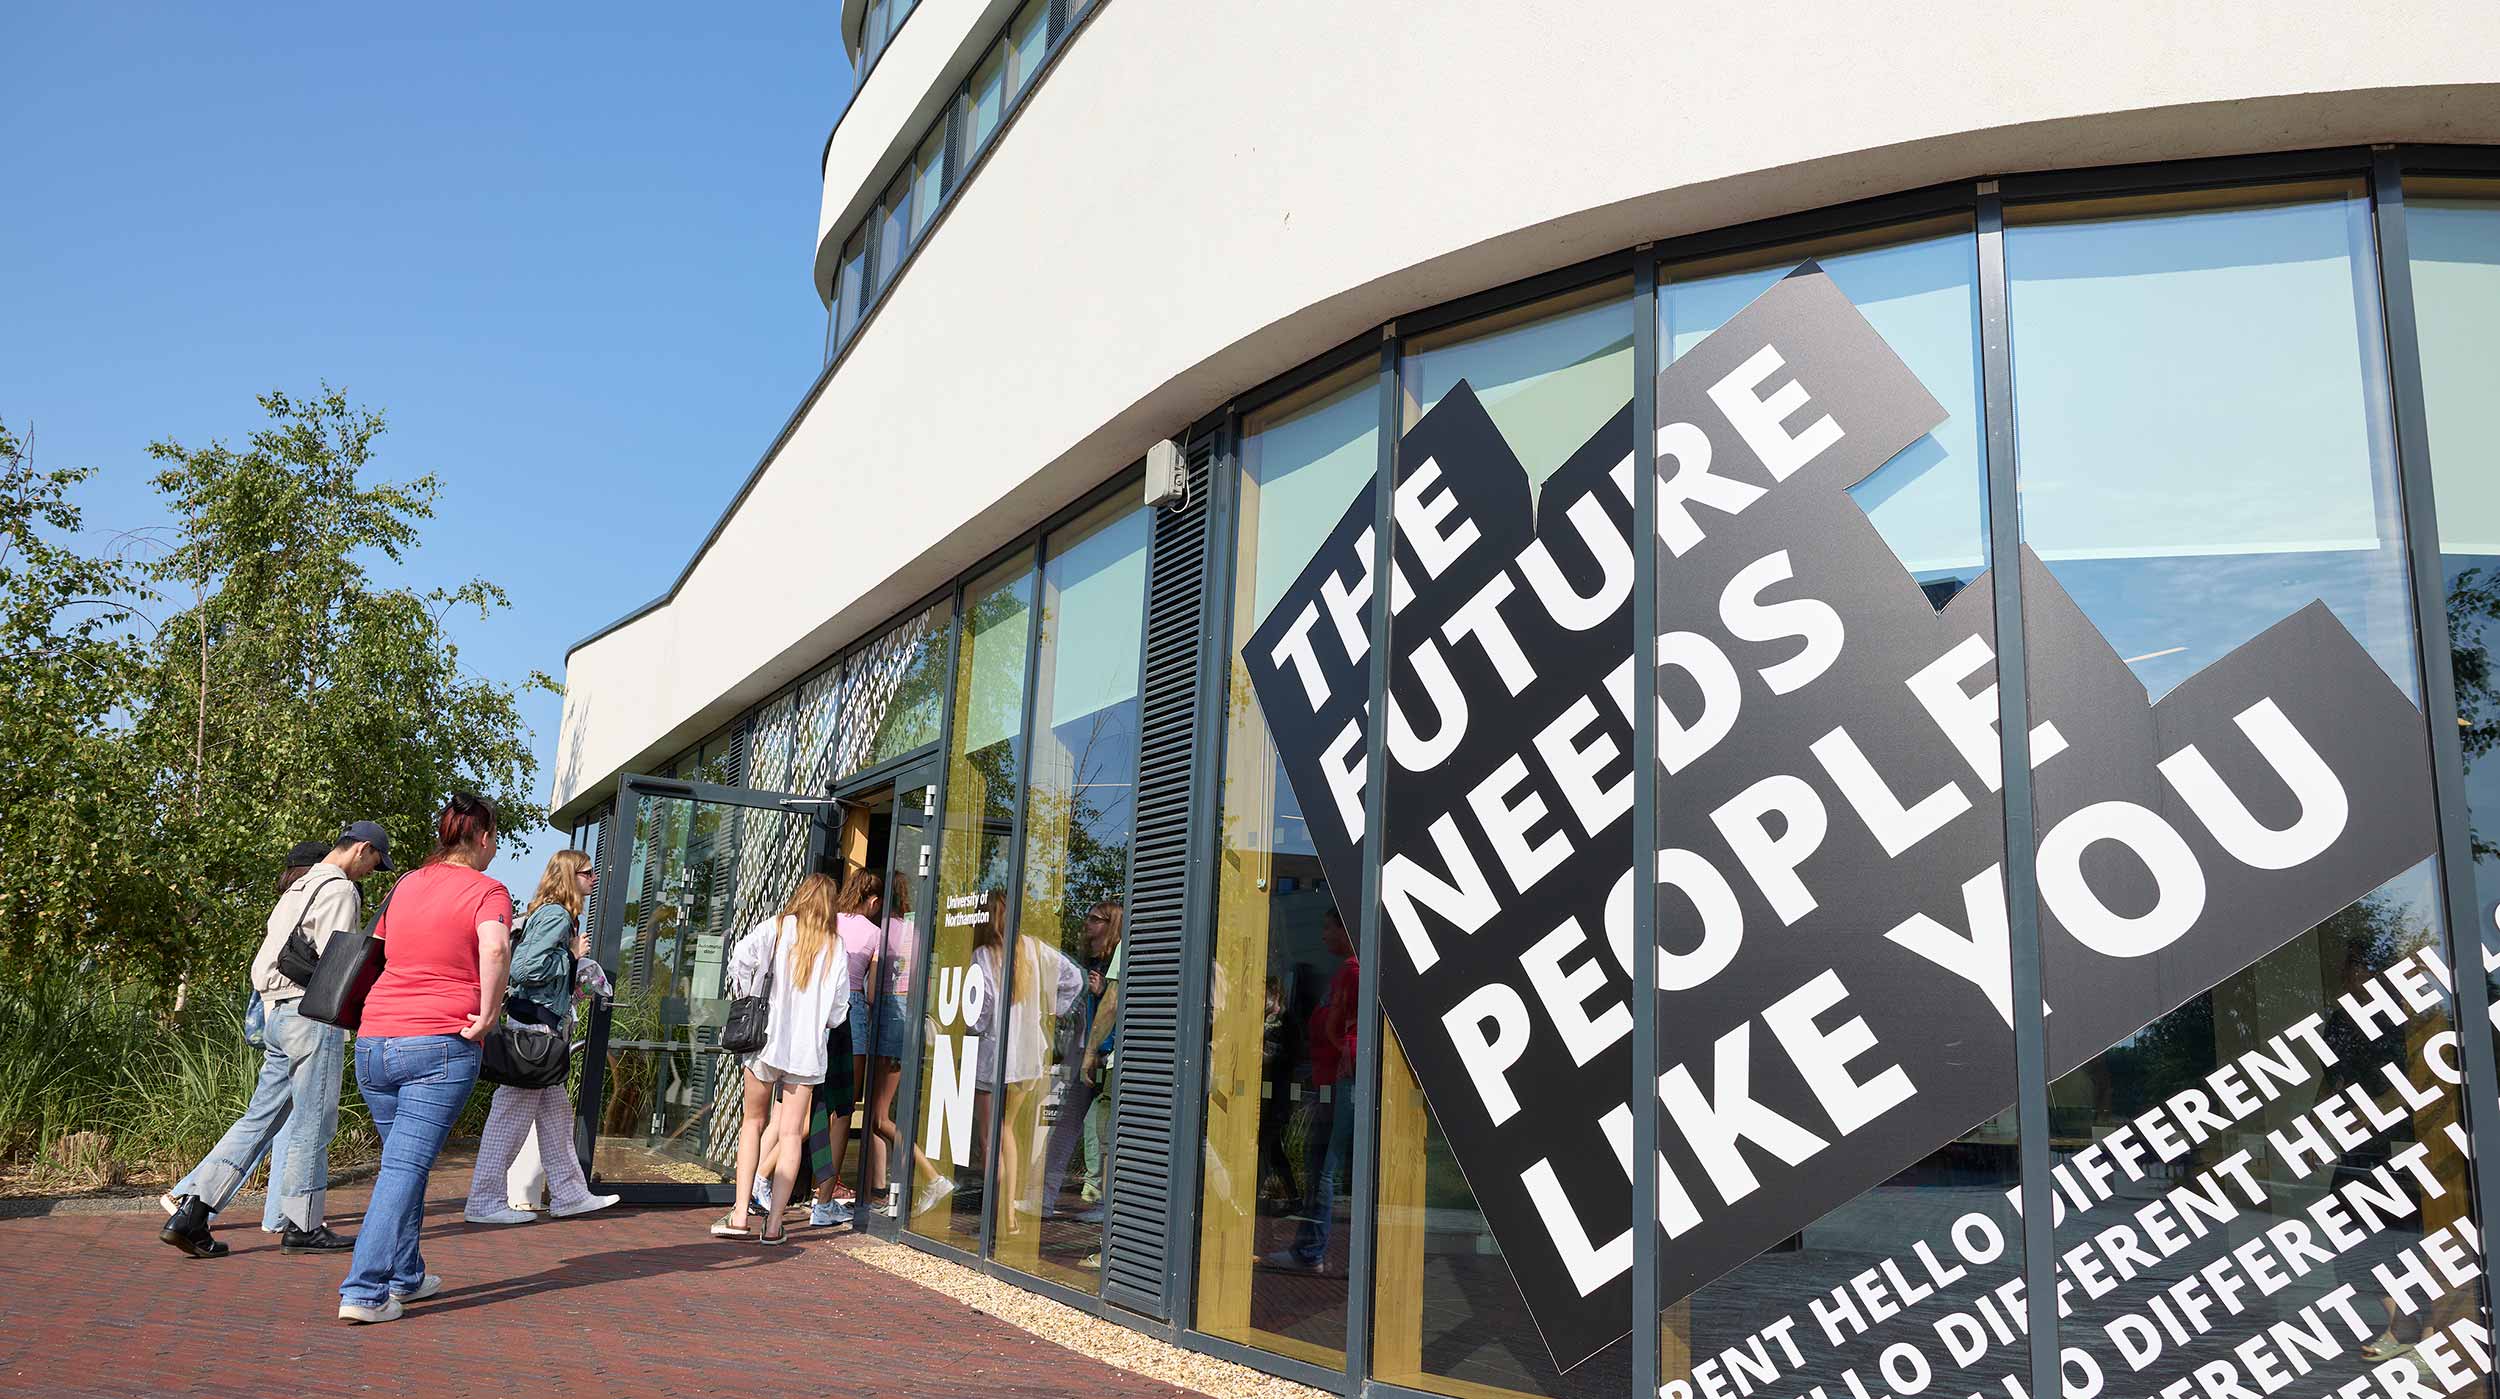 Visitors arrive at the Creative Hub on the morning of a University of Northampton open day. The display on the windows of the building says 'The future needs people like you'